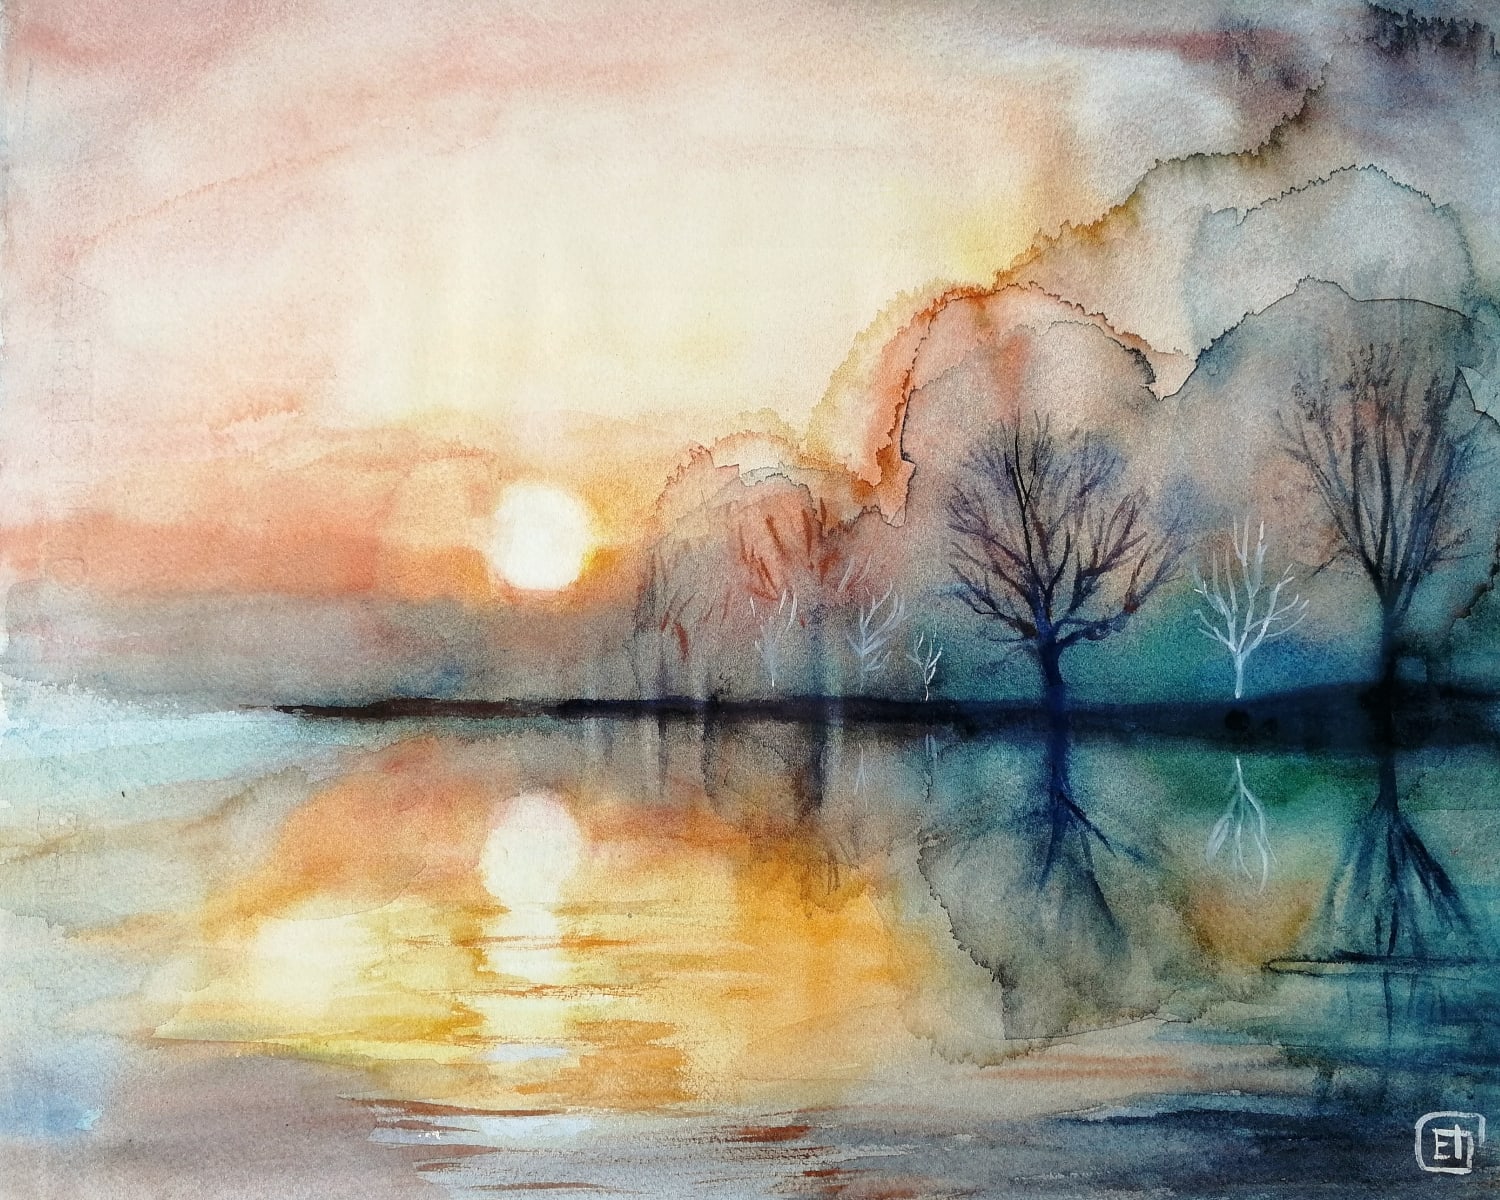 Abstract sunset on the lake, watercolor, me, 2022